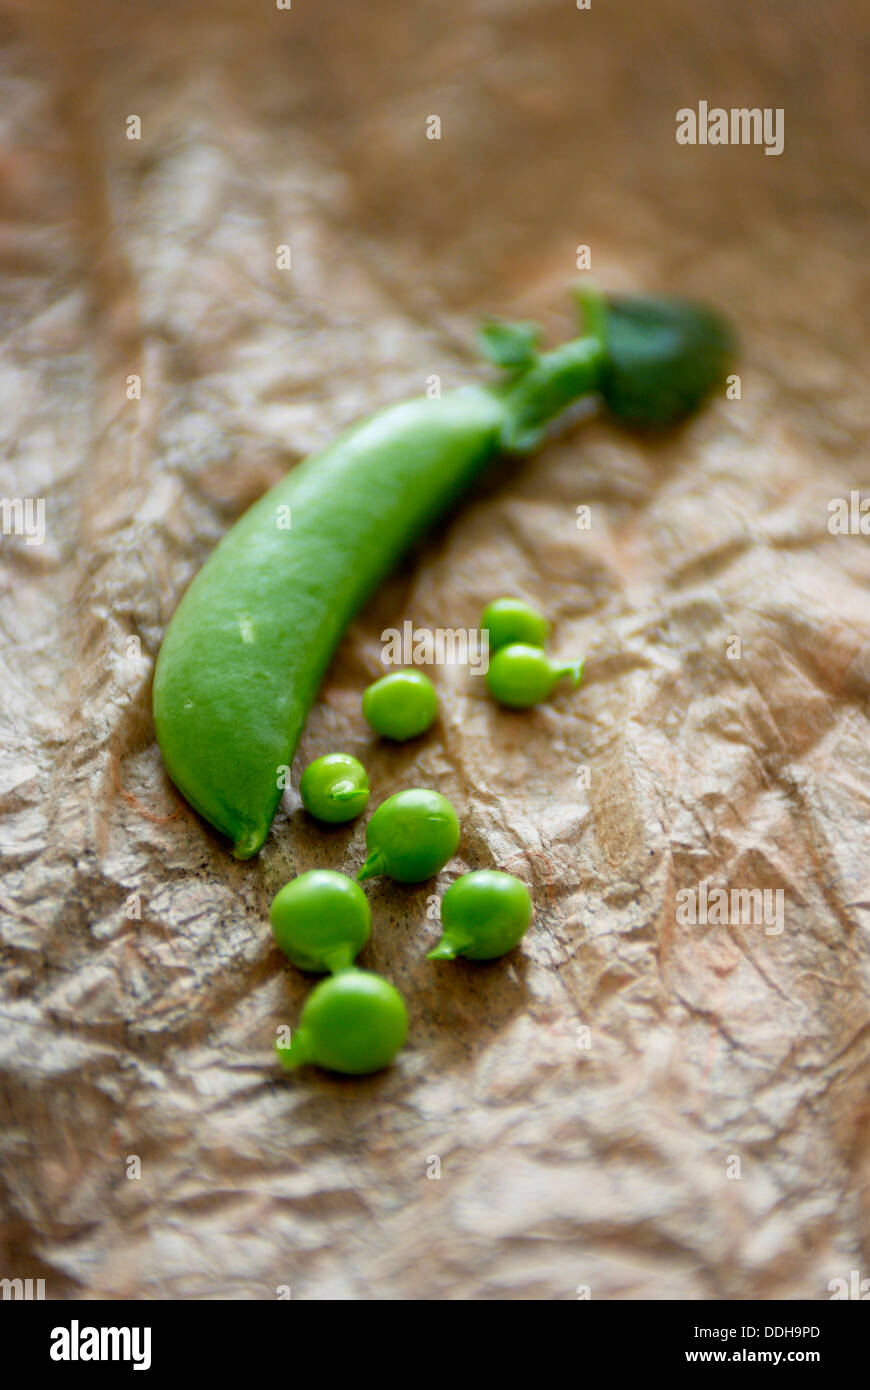 Shelled and unshelled sugar snap peas on a piece of brown crinkled cooking paper. Stock Photo